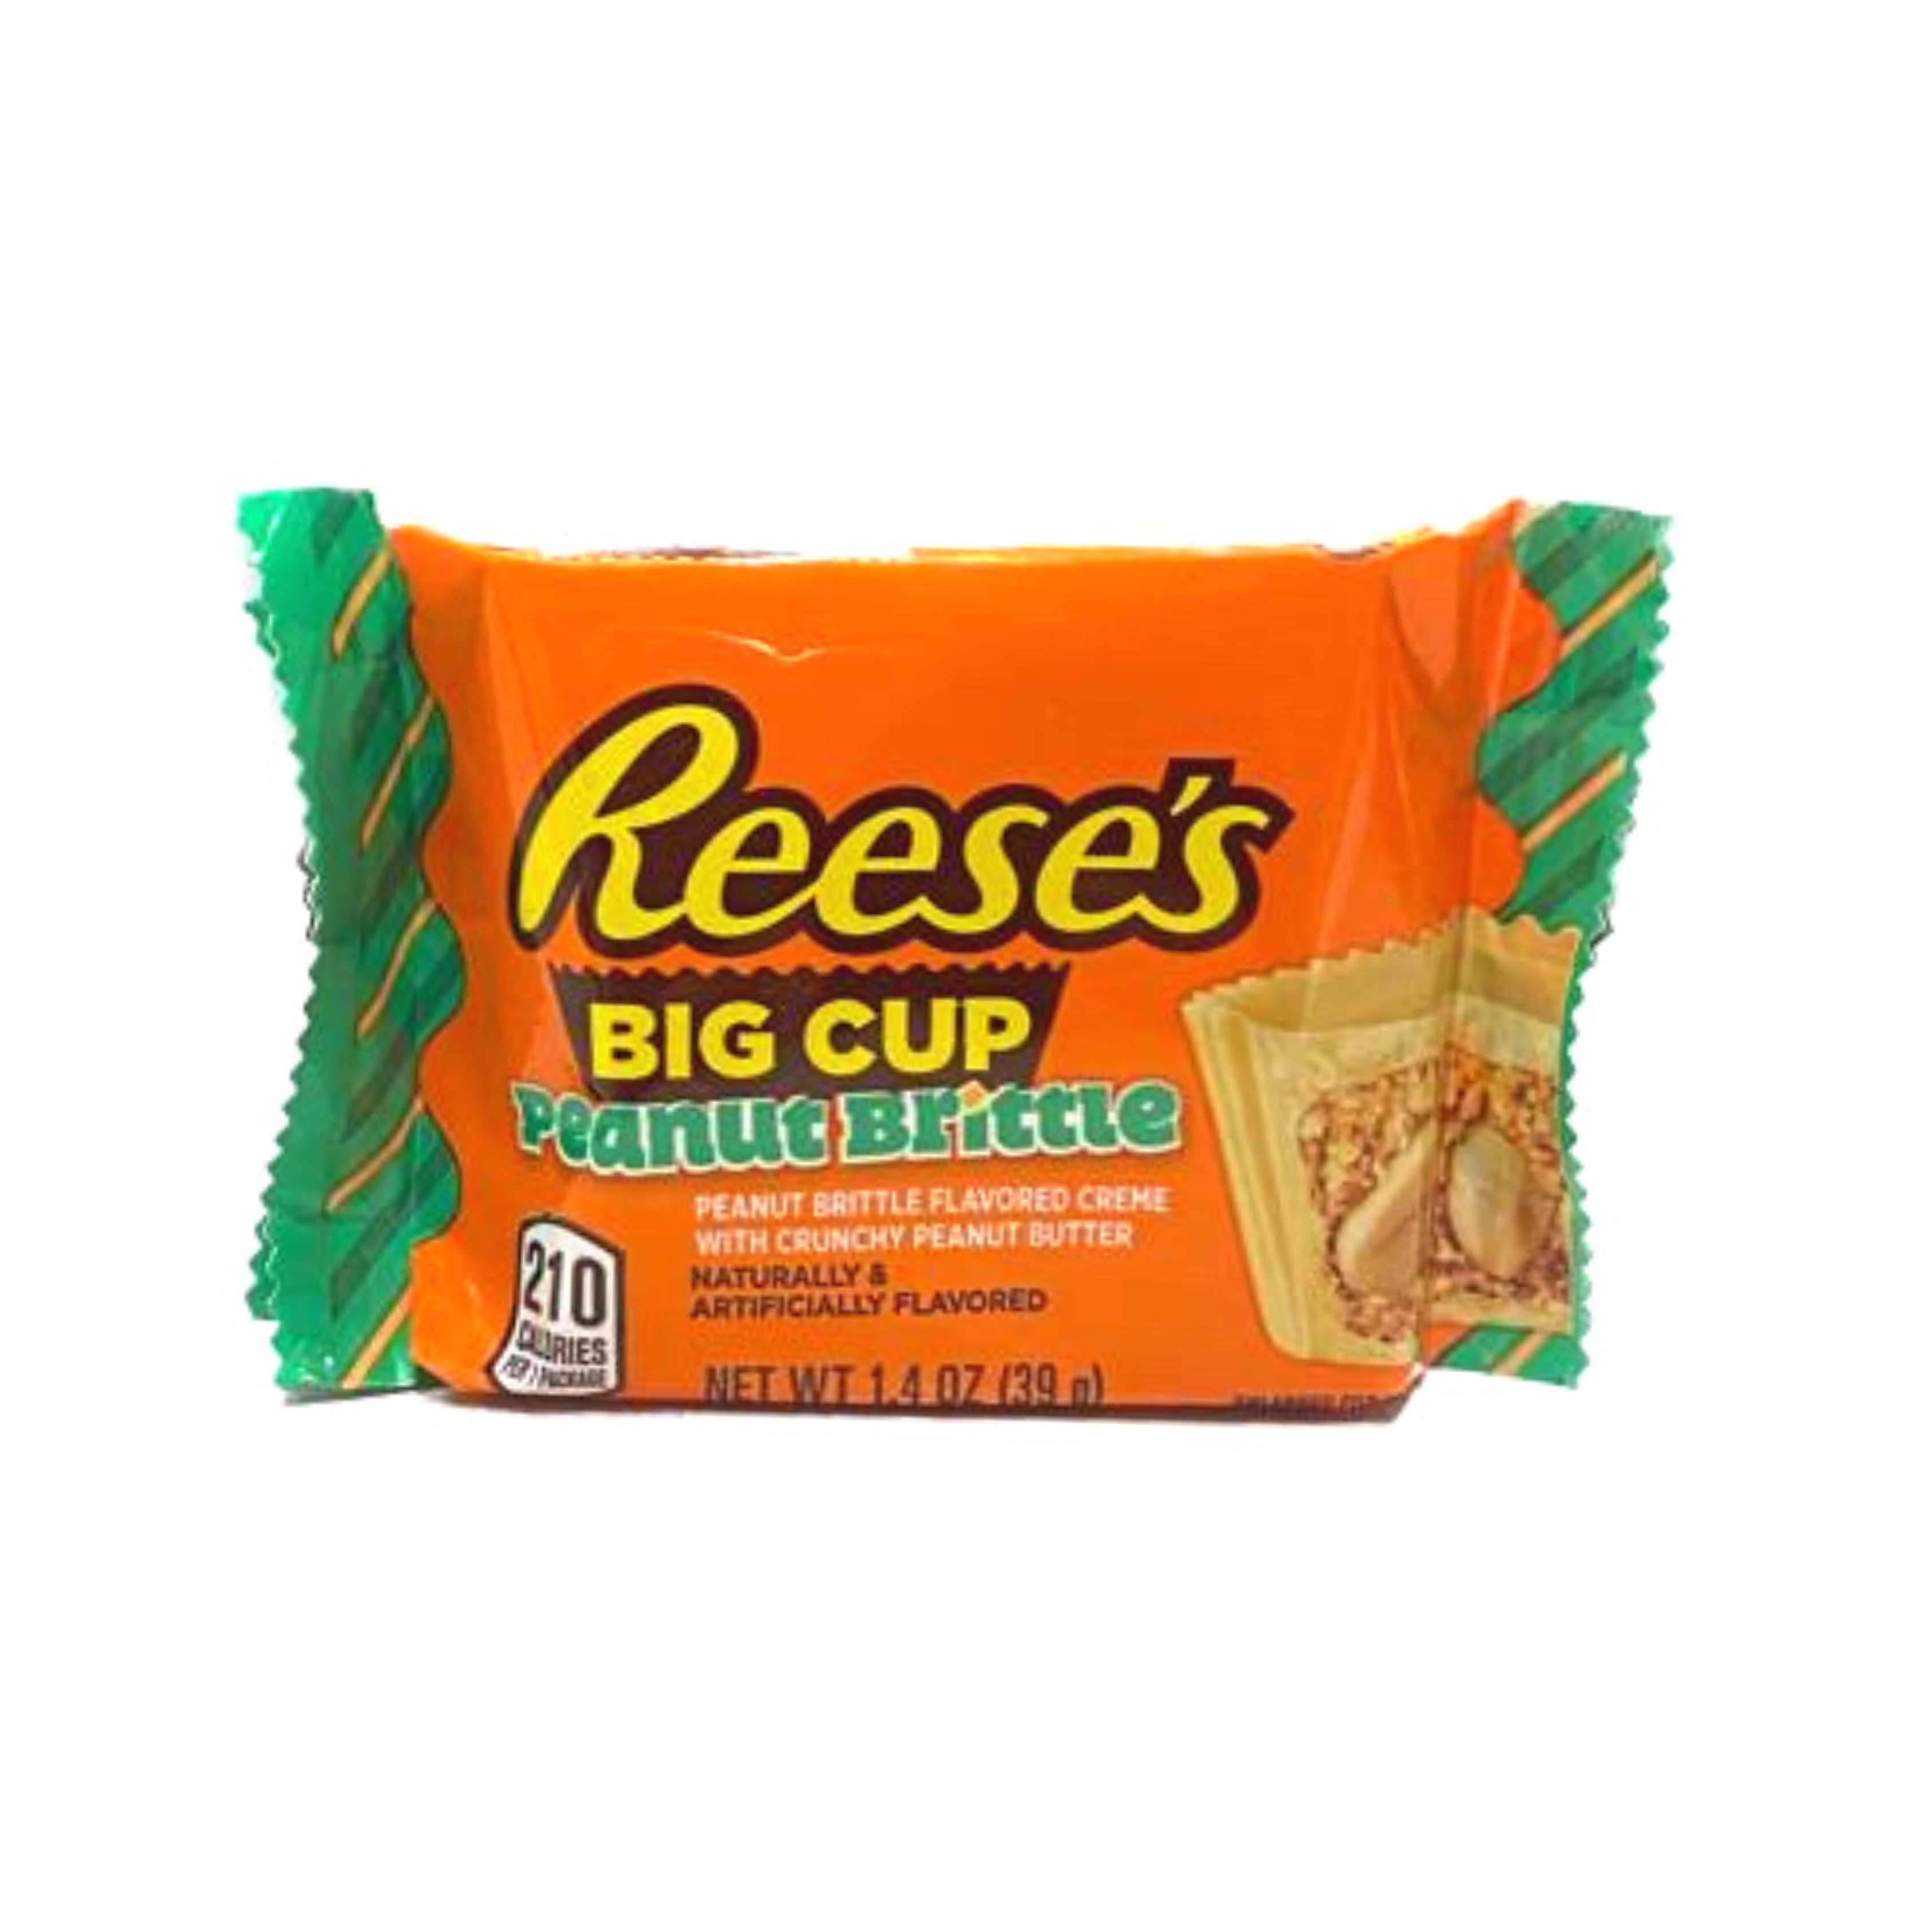 Reese's - Big Cup Peanut Brittle 39g